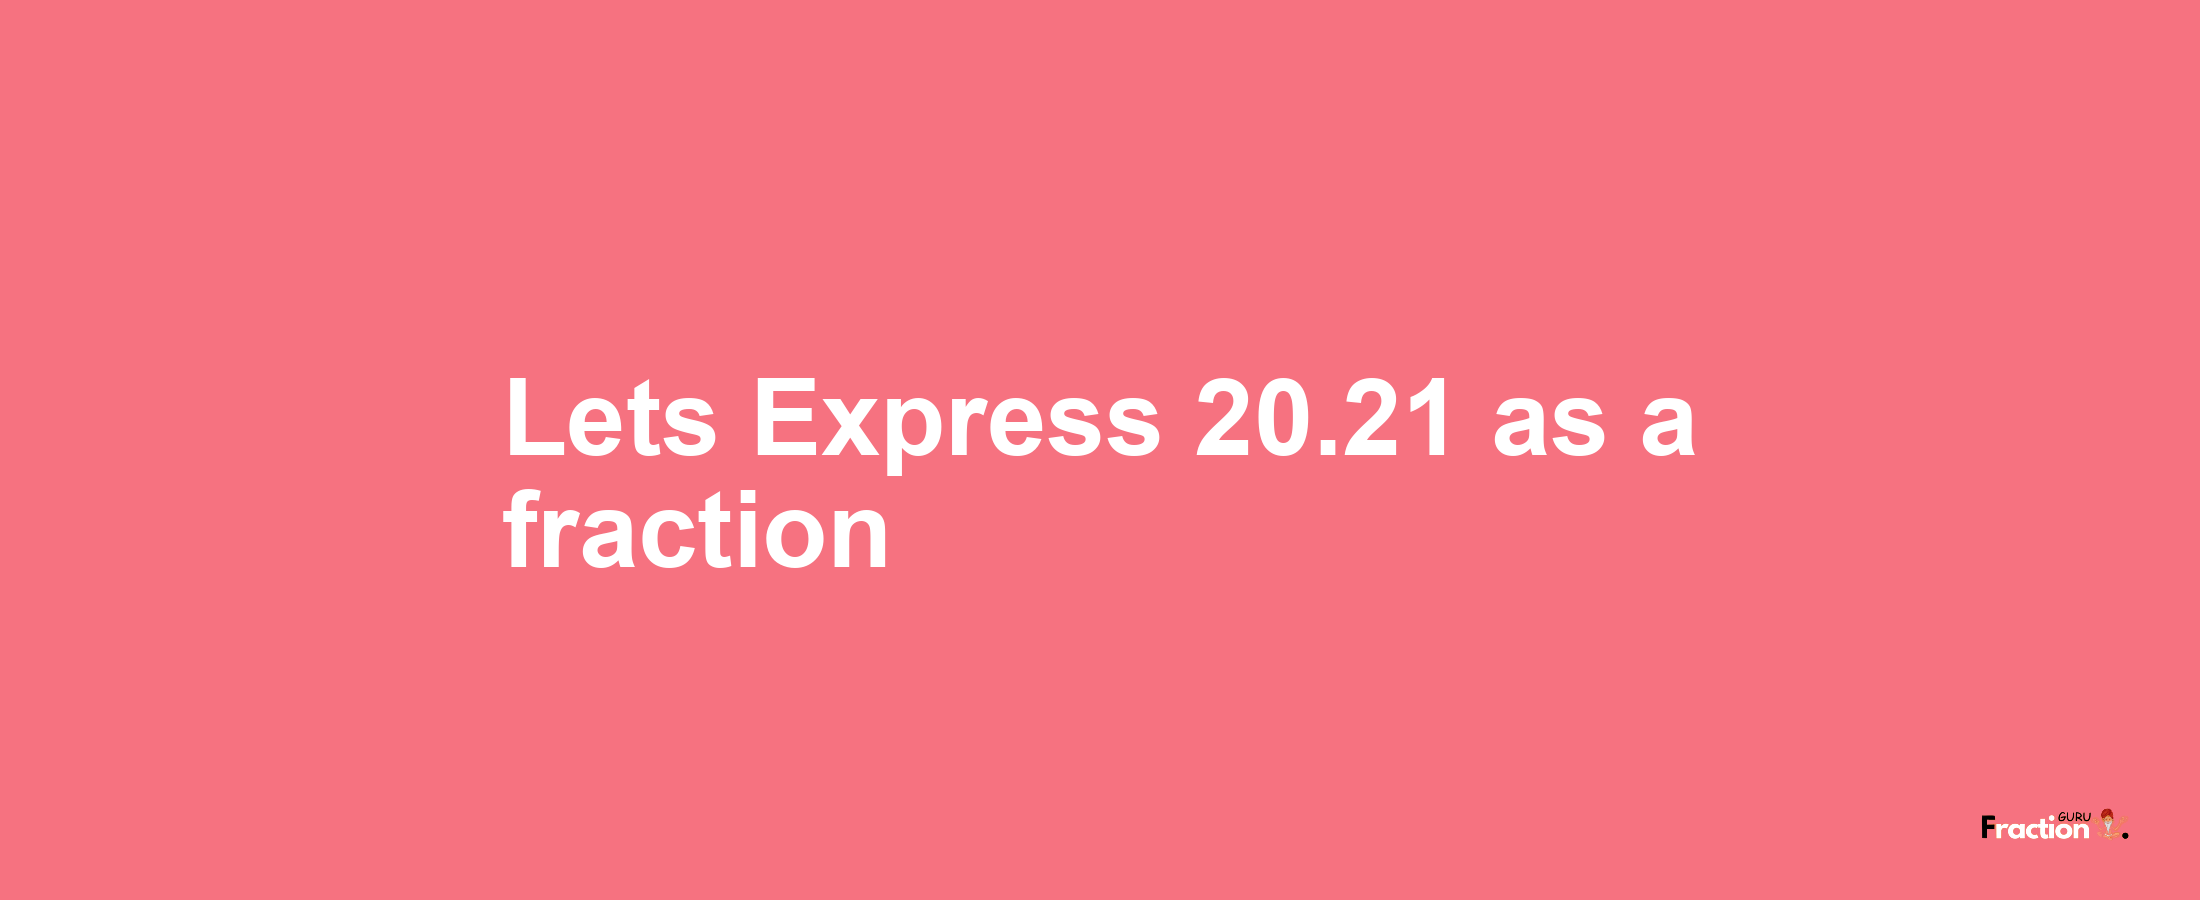 Lets Express 20.21 as afraction